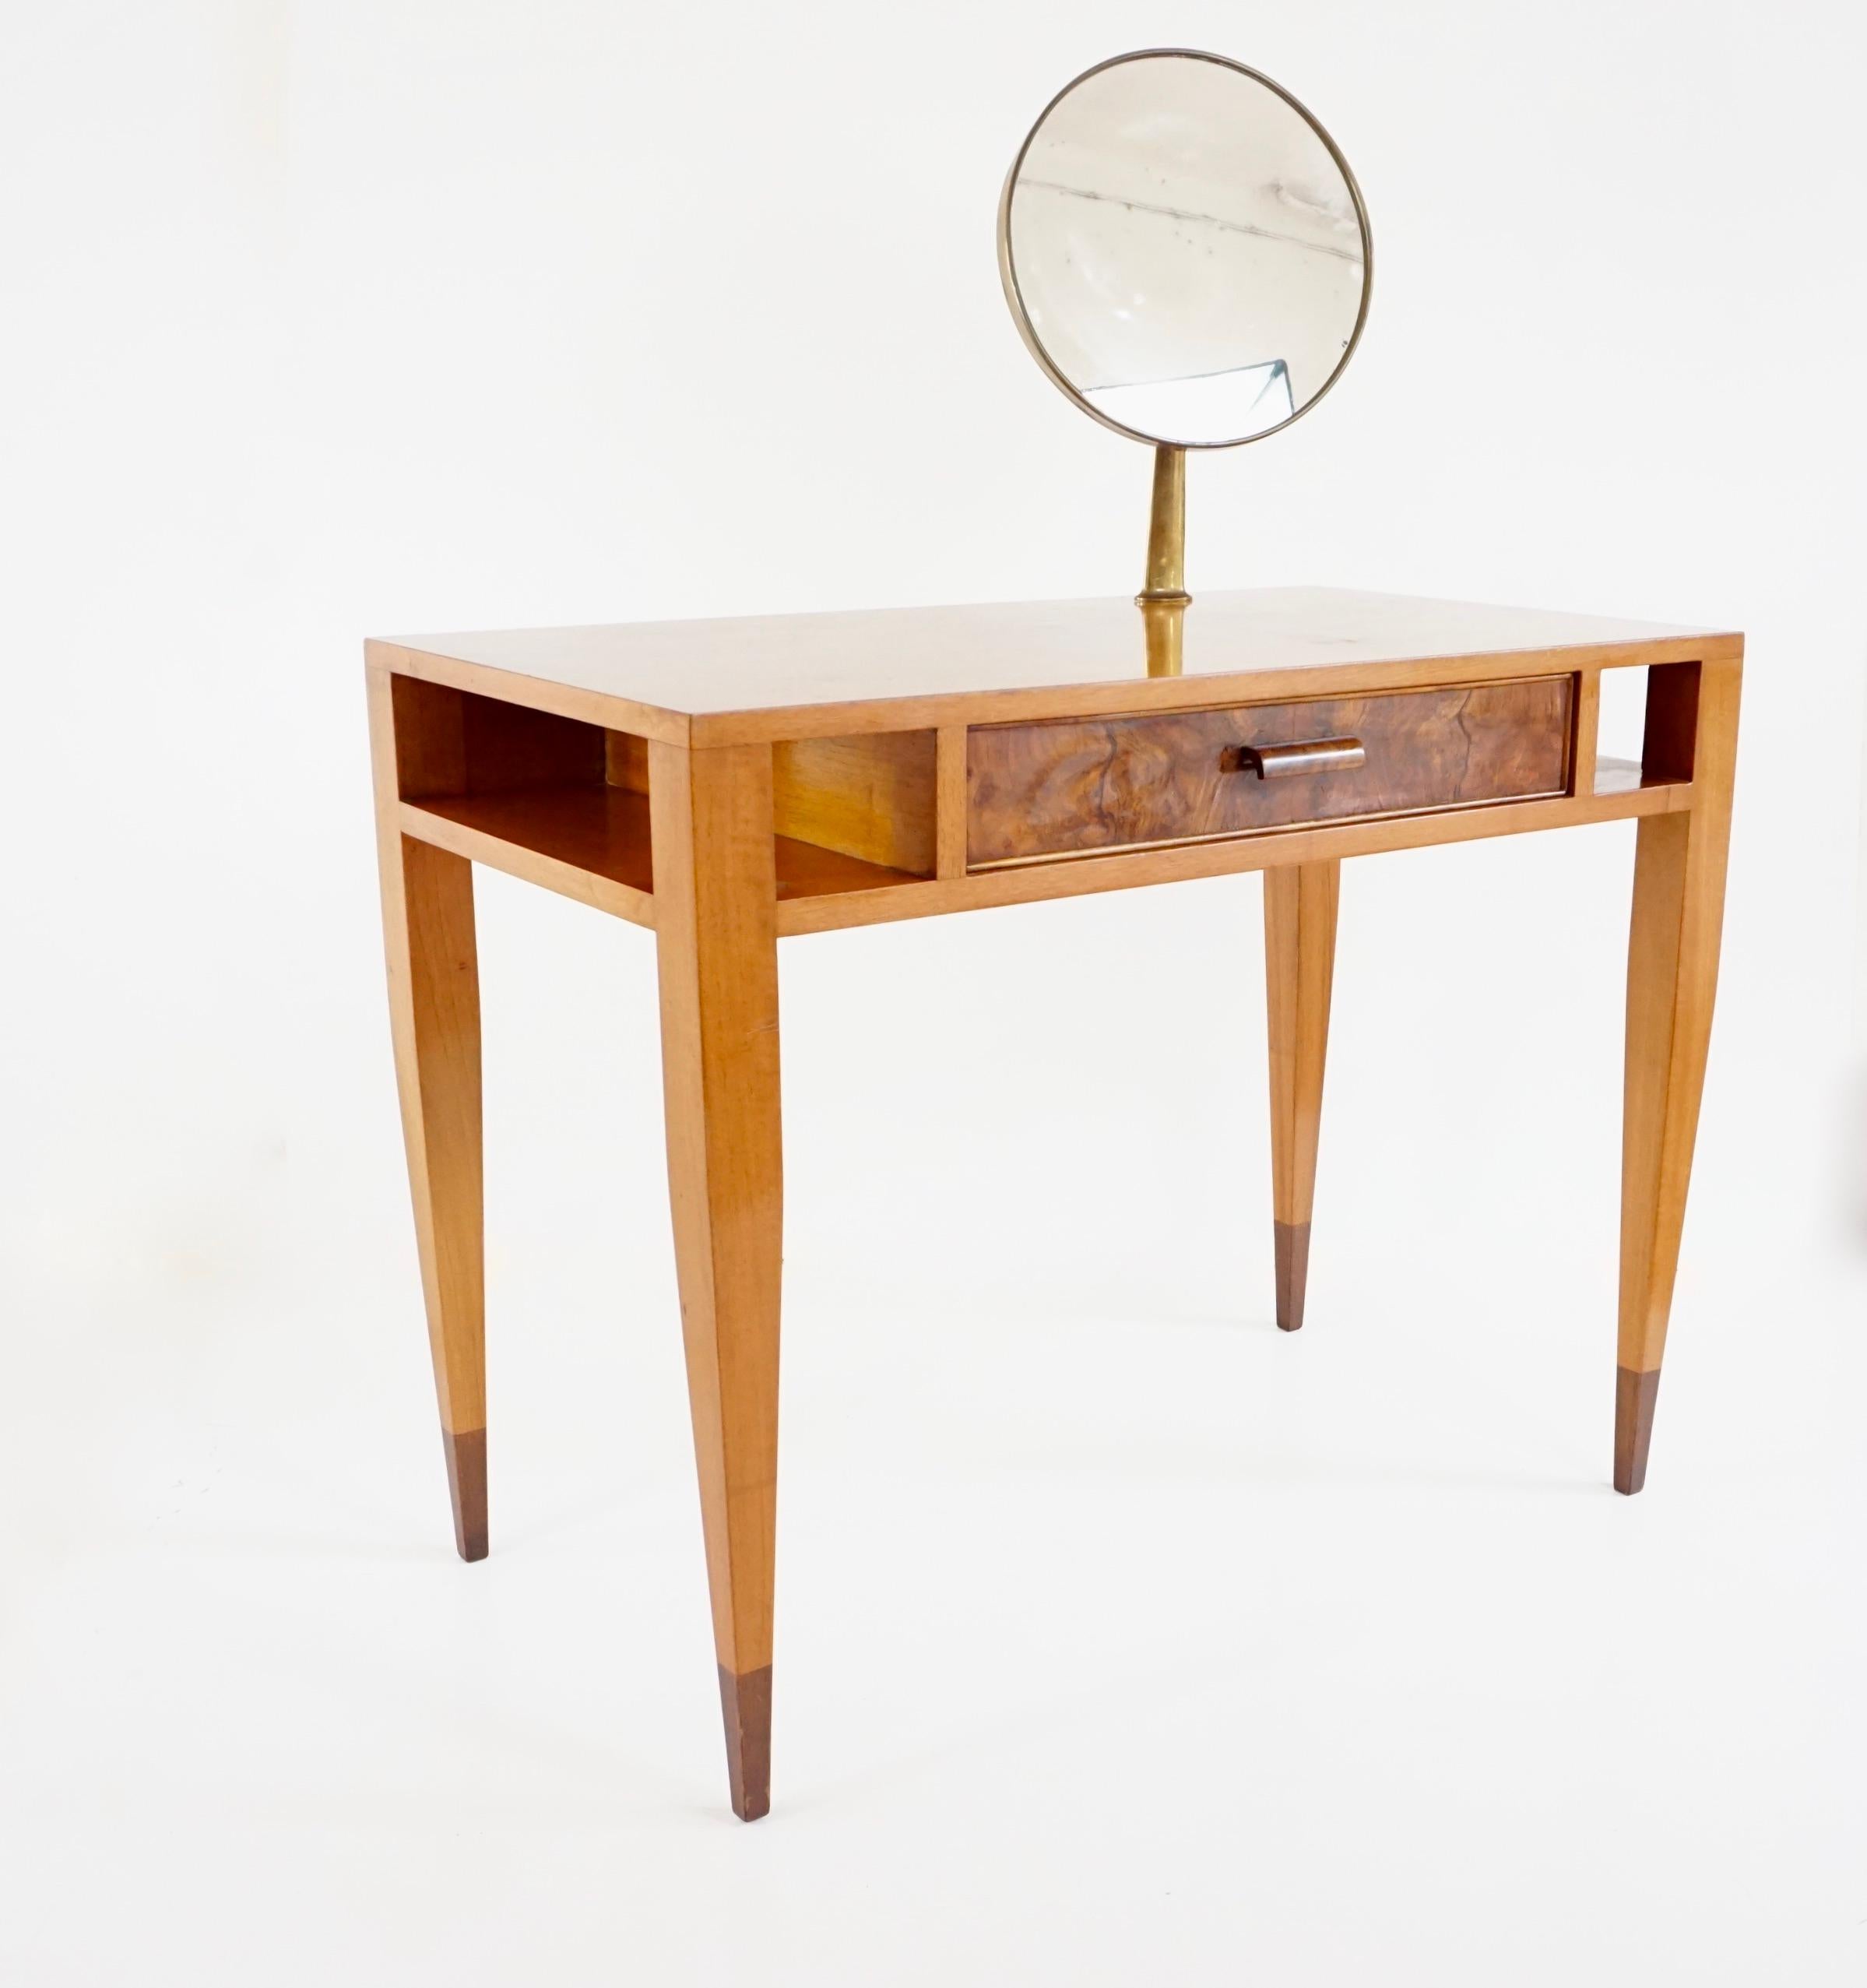 rare Gio Ponti toilette, vanity table  dressing table
one drawer with an adjustable brass mirror by Fontana Arte
produced by Giordano Chiesa for Dassi circa 1950 
walnut, olive wood veneer, brass and mirror glass
very good original